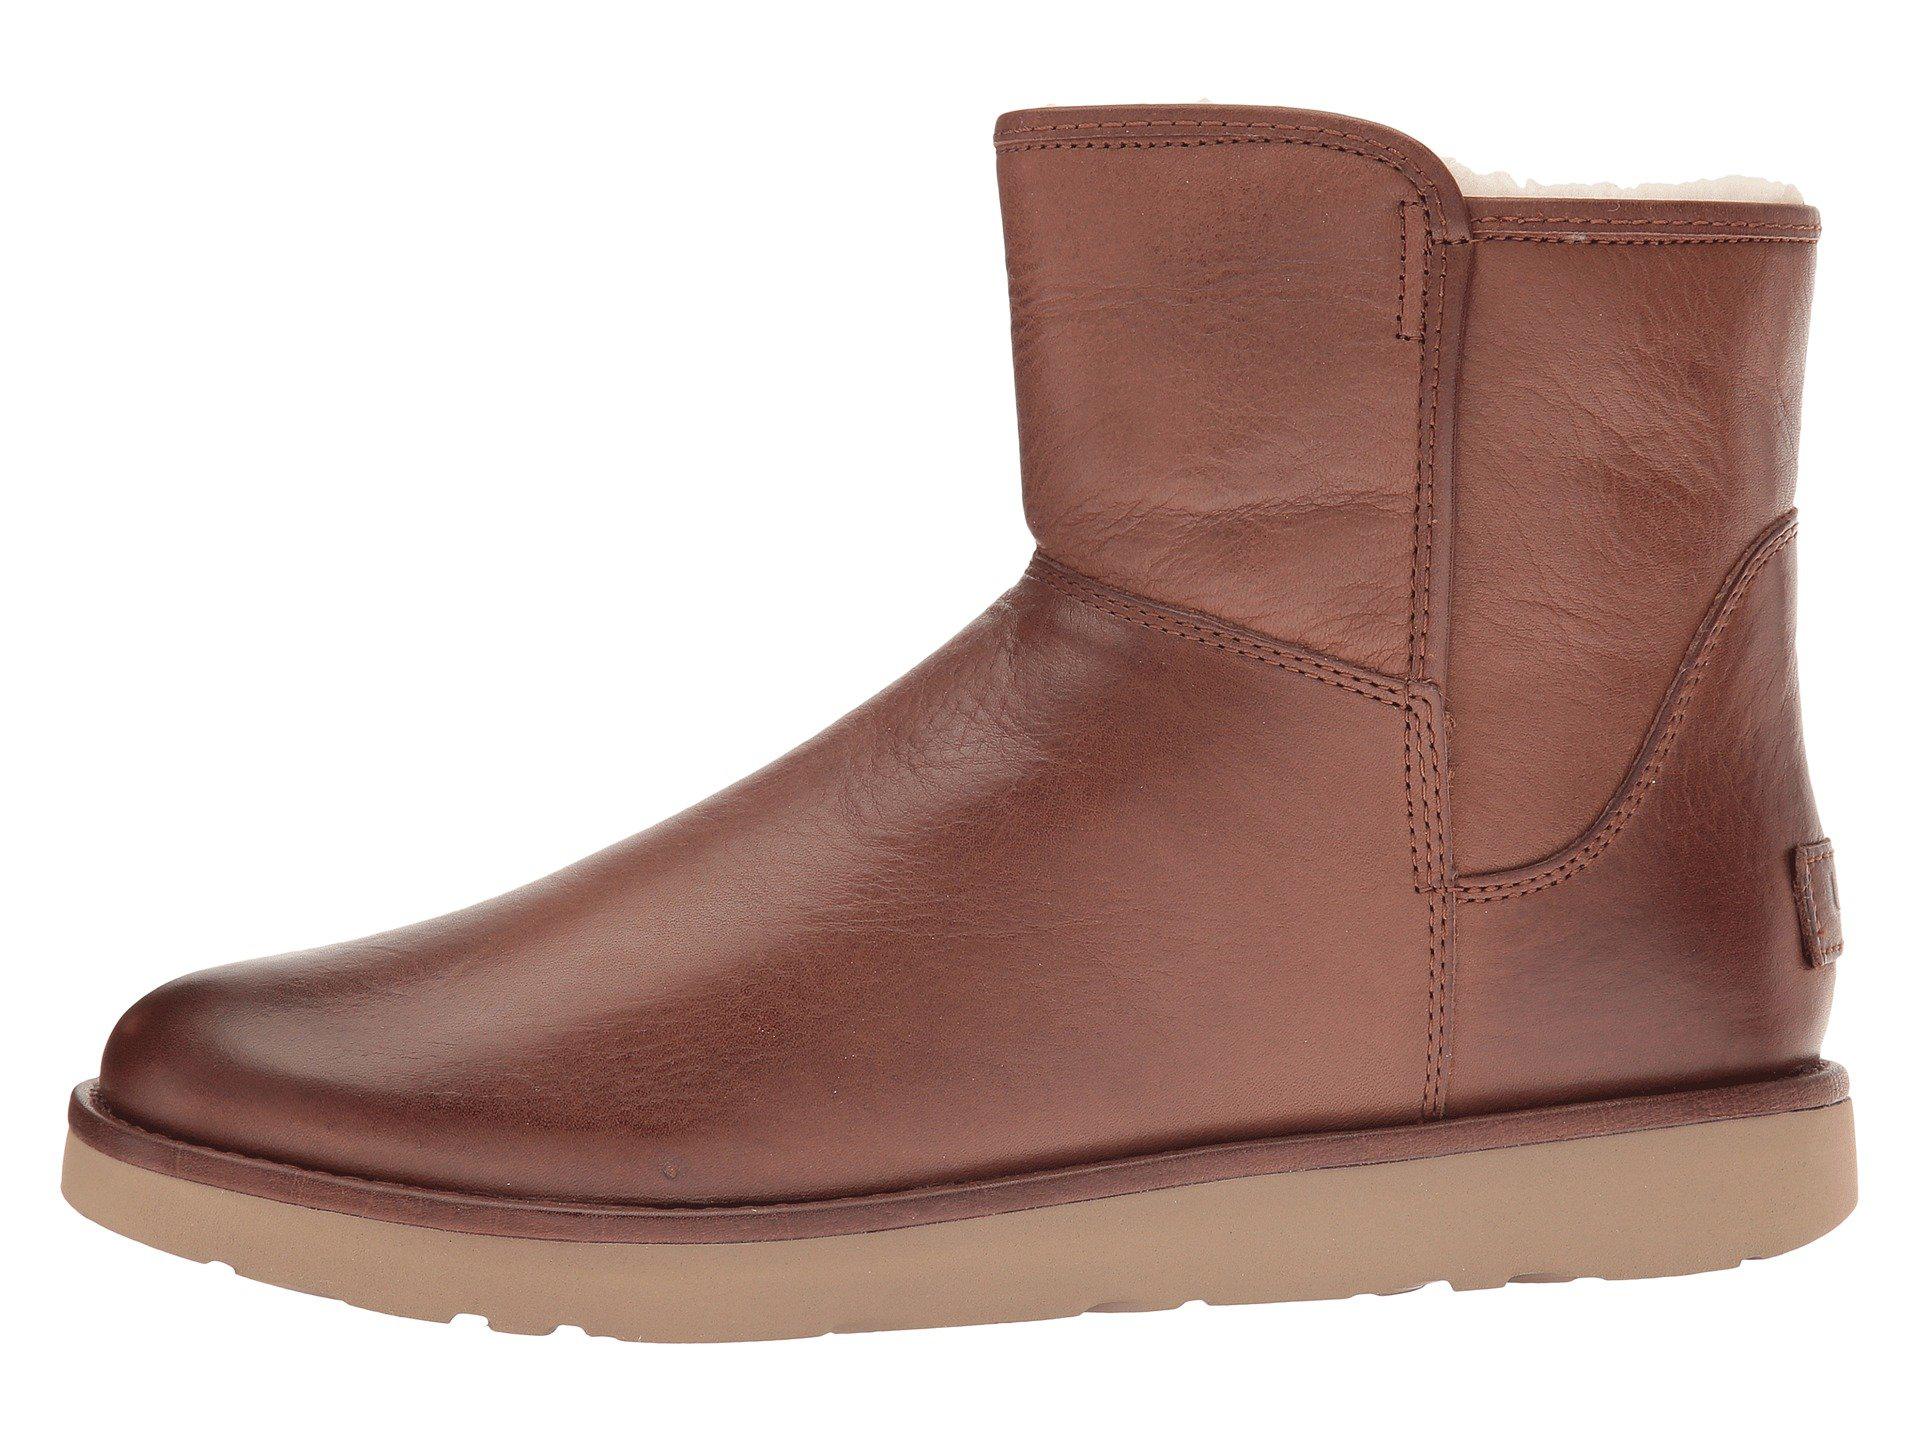 leather uggs for women